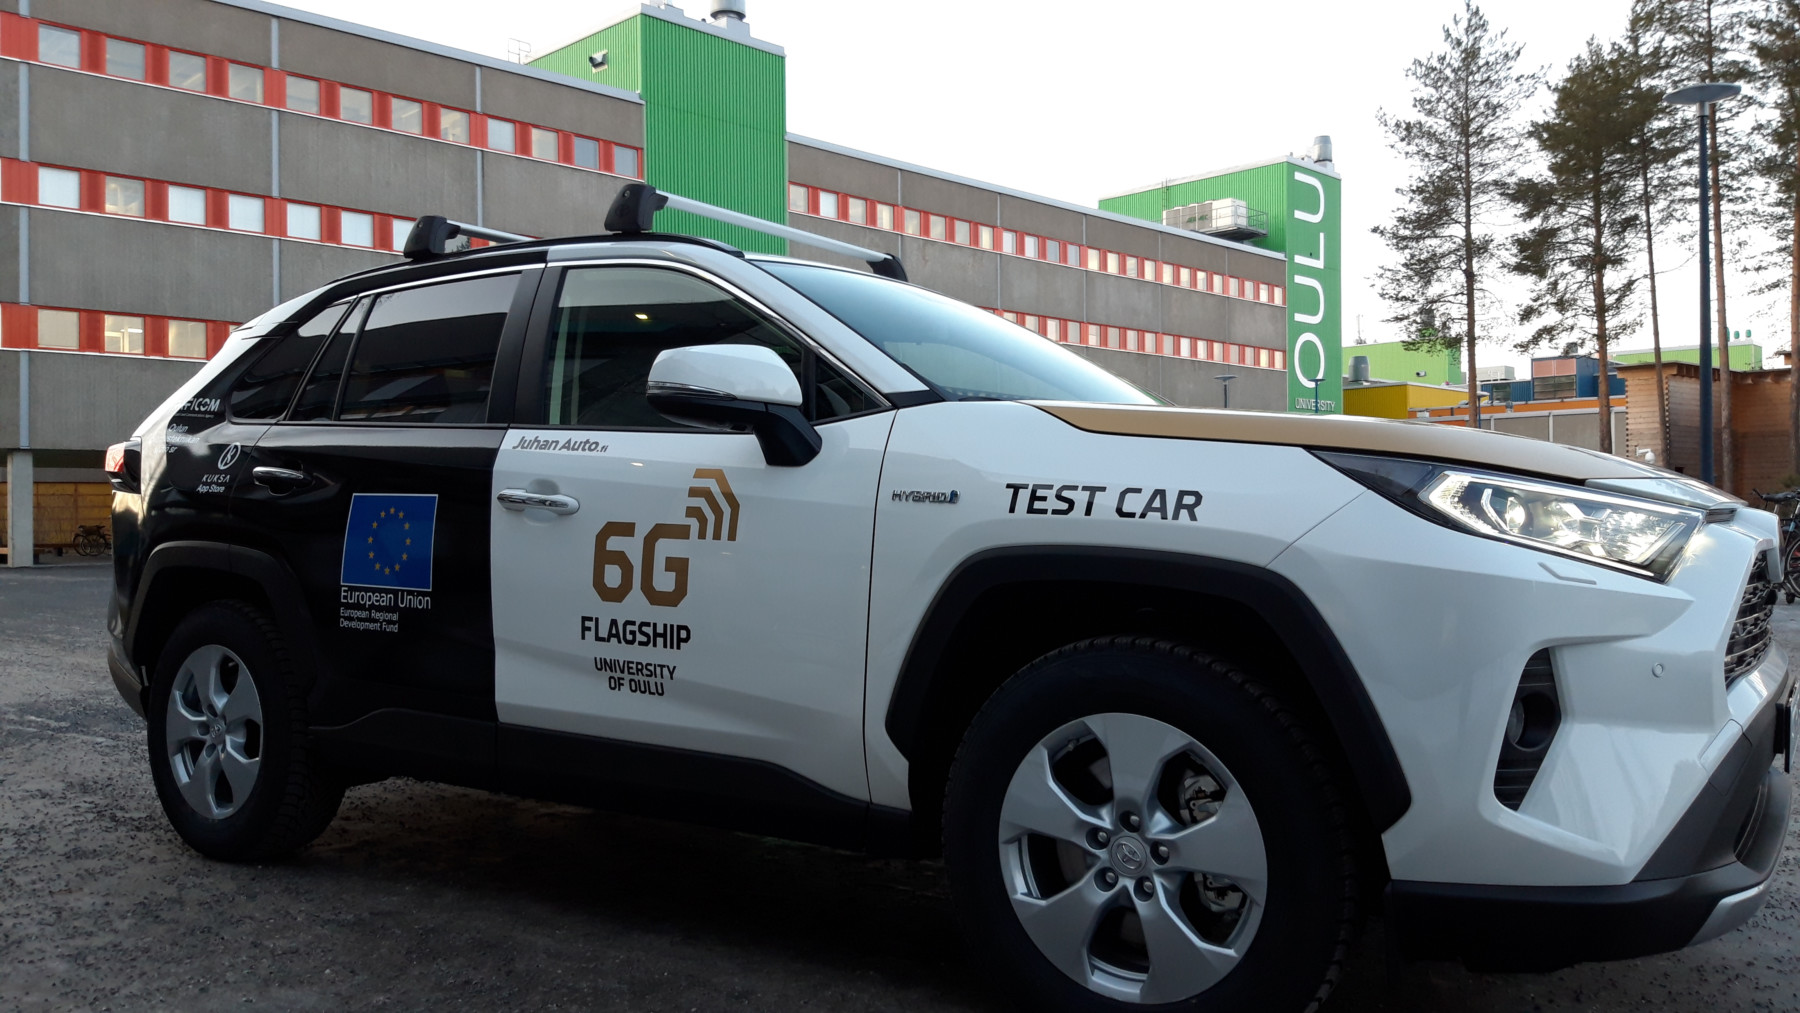 A car with the words 6G Flagship and Test Car on its side is parked outside a building at the University of Oulu.